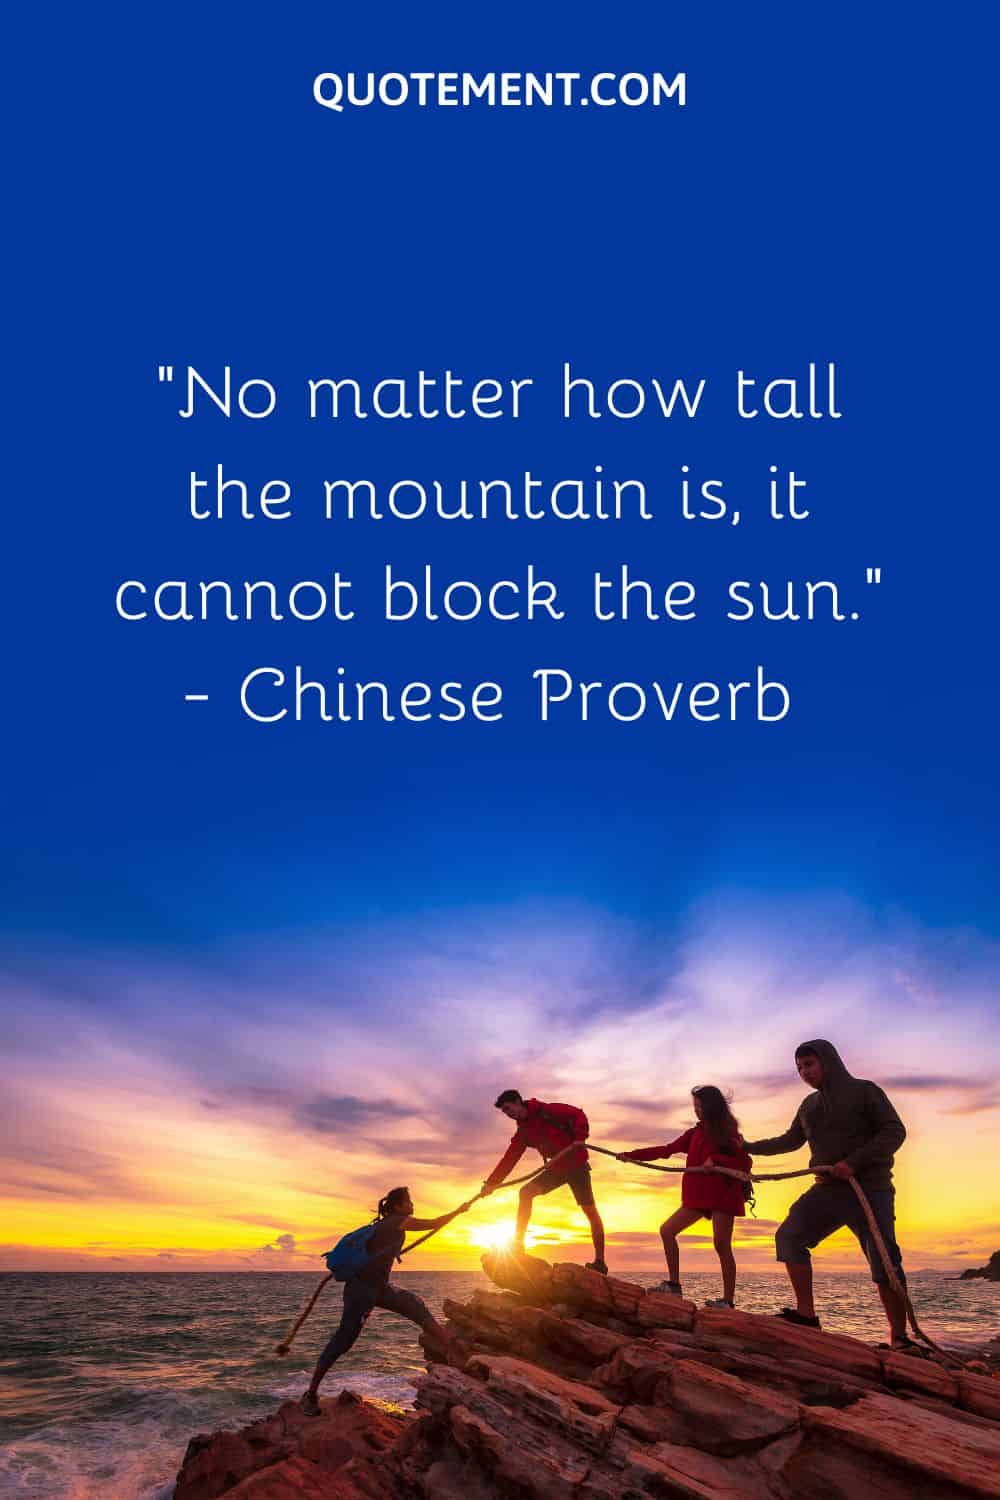 “No matter how tall the mountain is, it cannot block the sun.” — Chinese Proverb